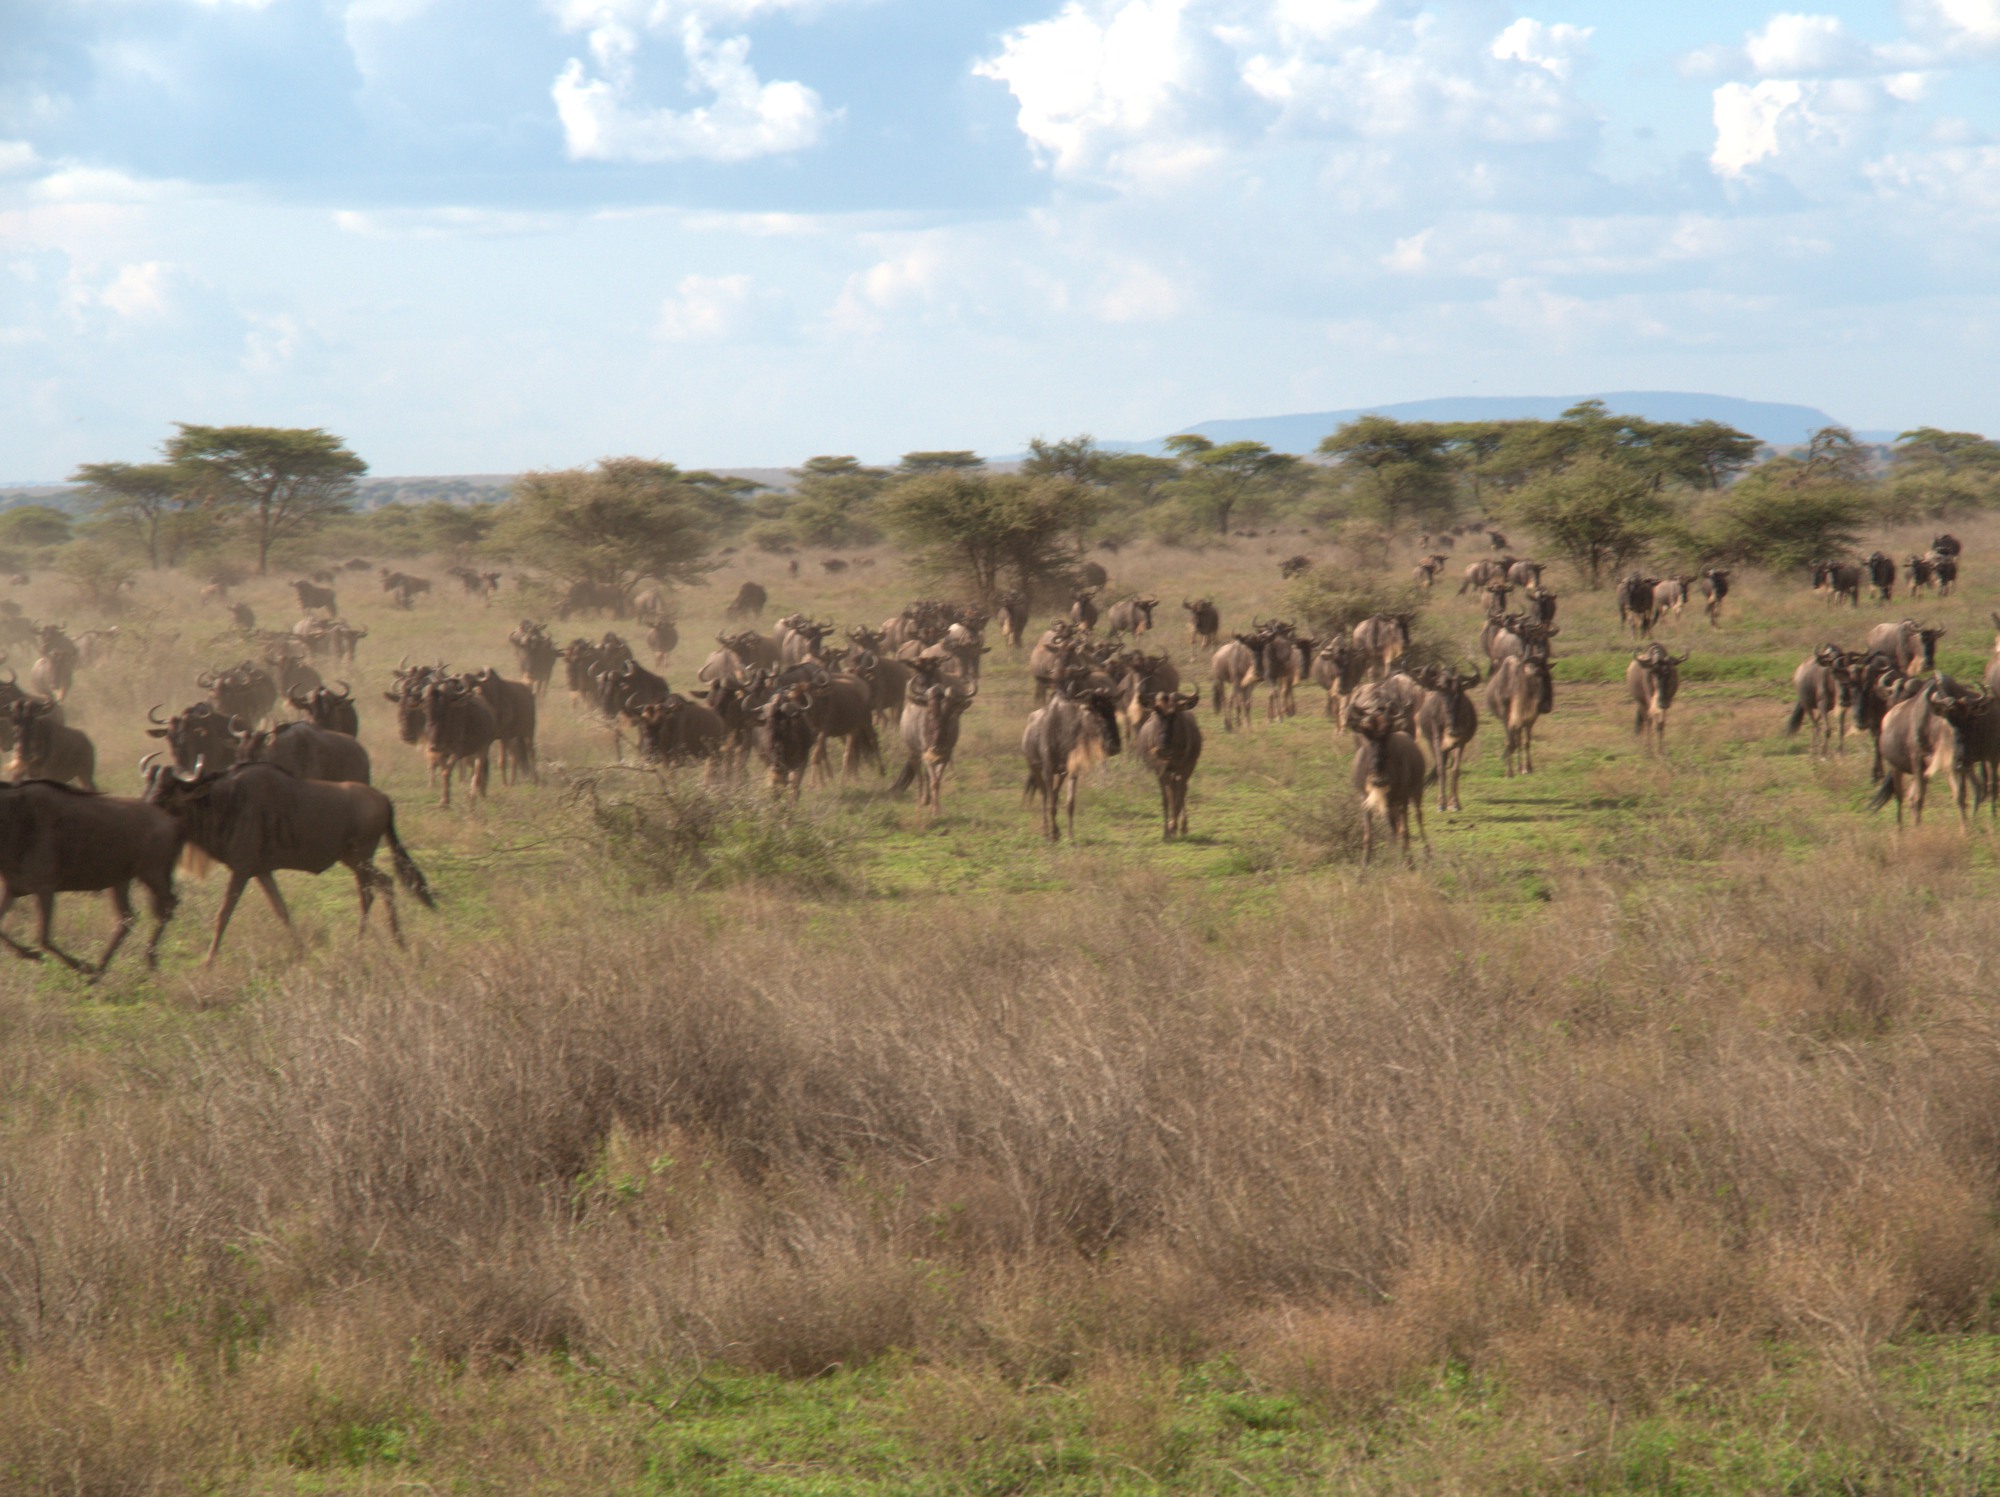 small scale wildebeest migration